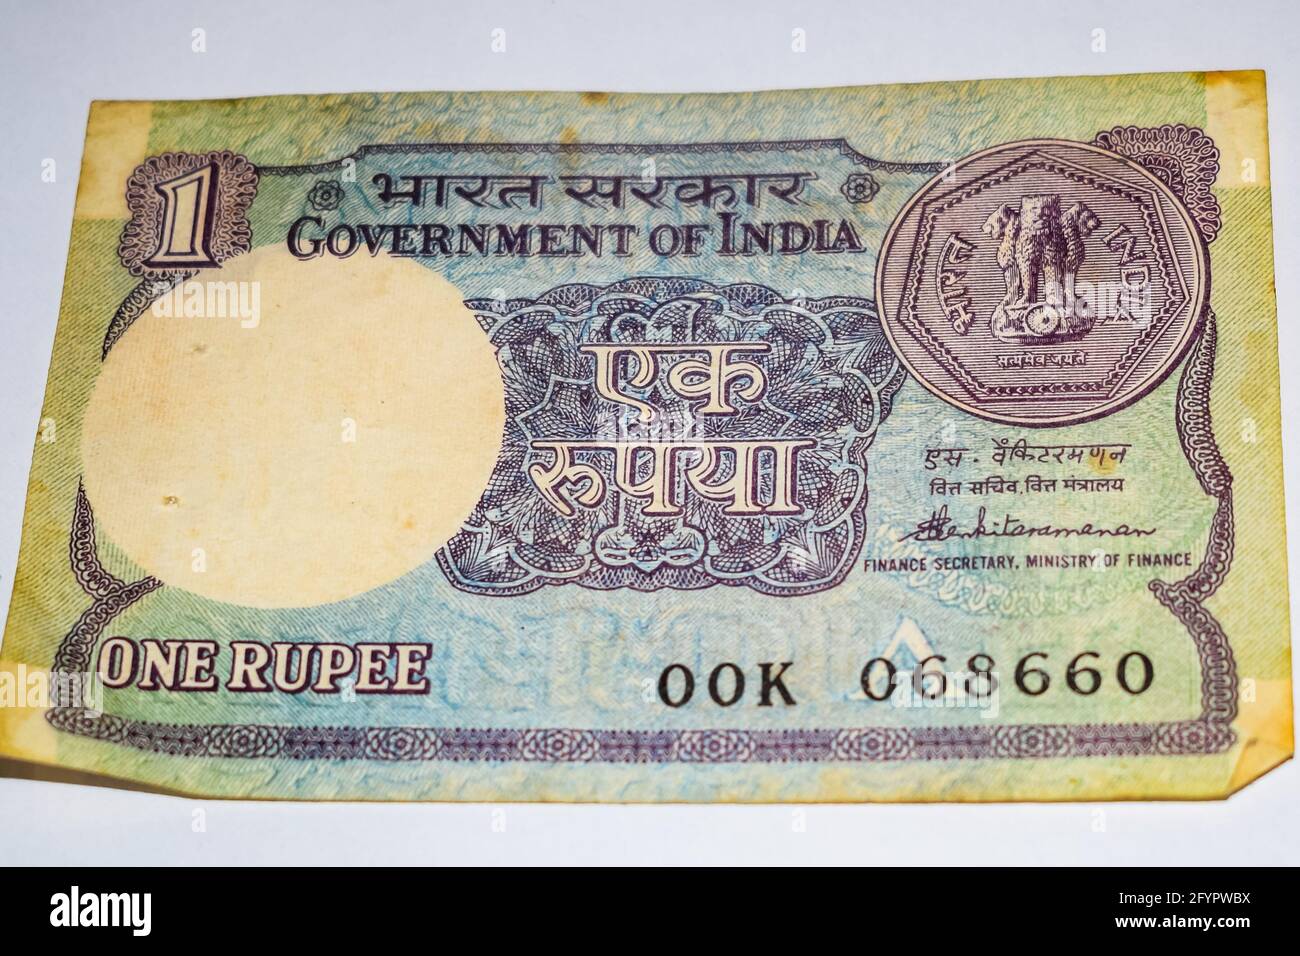 Rare Old Indian One rupee currency note on white background ...